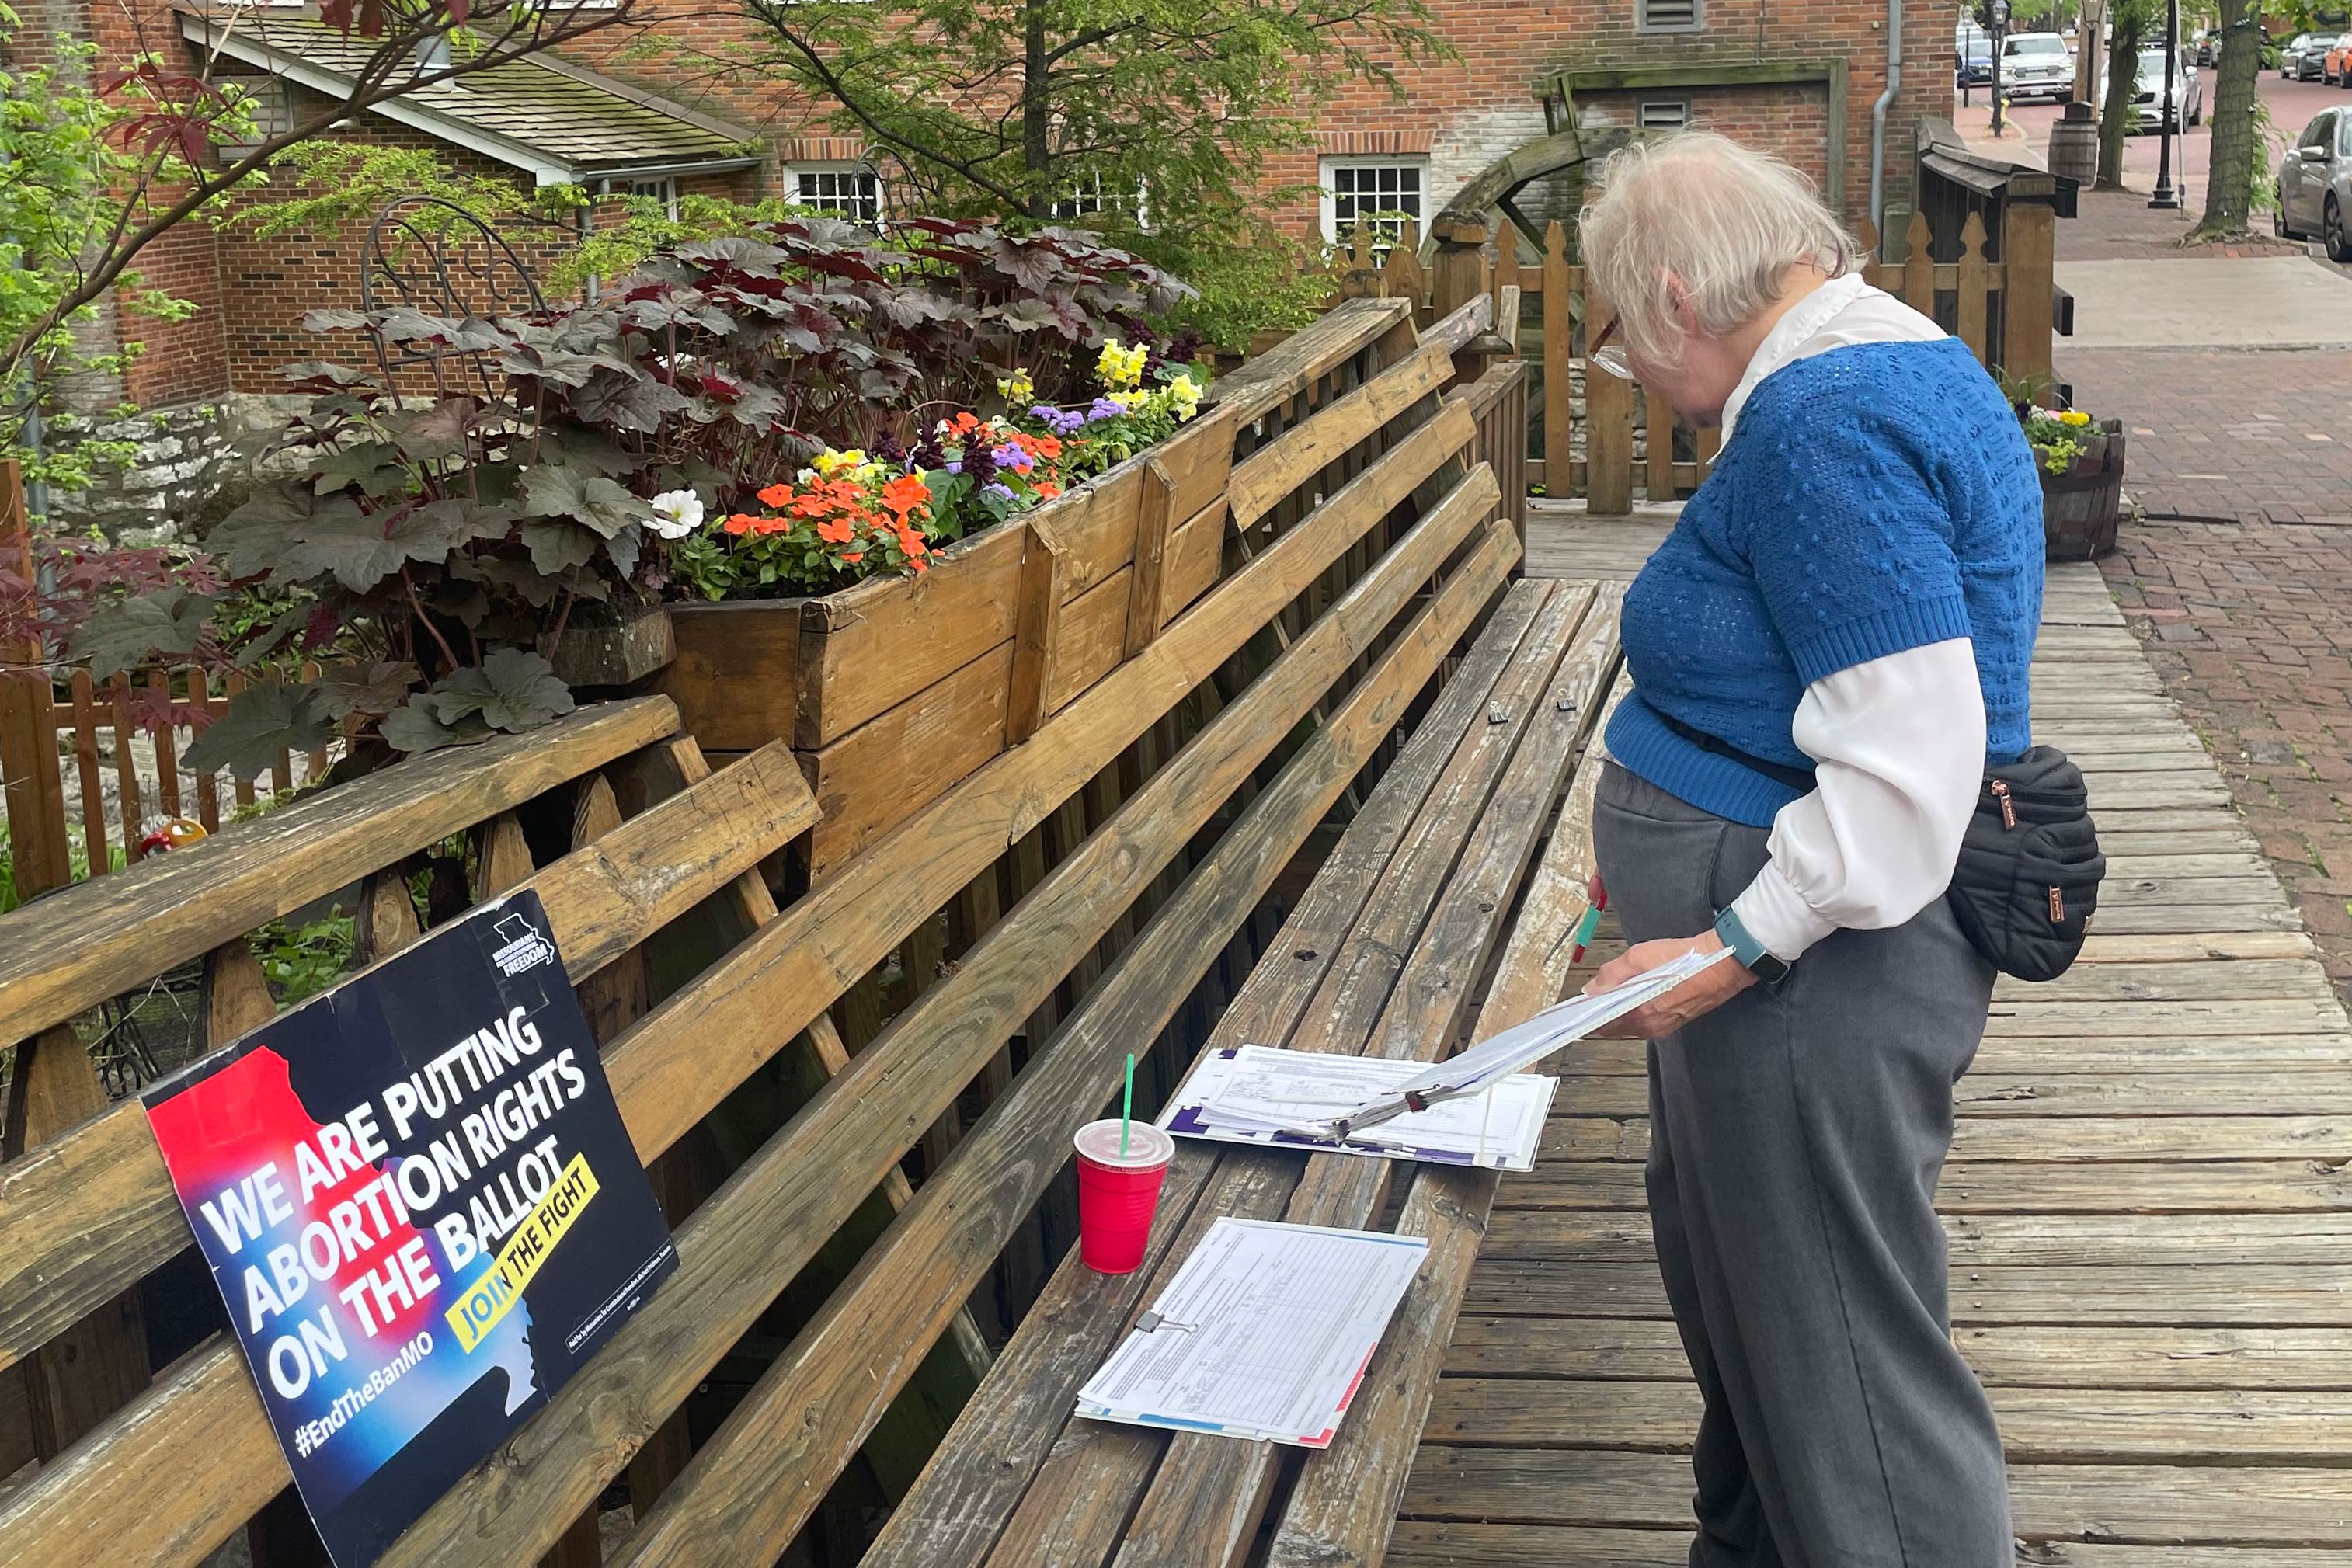 A photo of a woman looking at a bench with papers and a sign that reads, "We are putting abortion rights on the ballot. Join the fight."